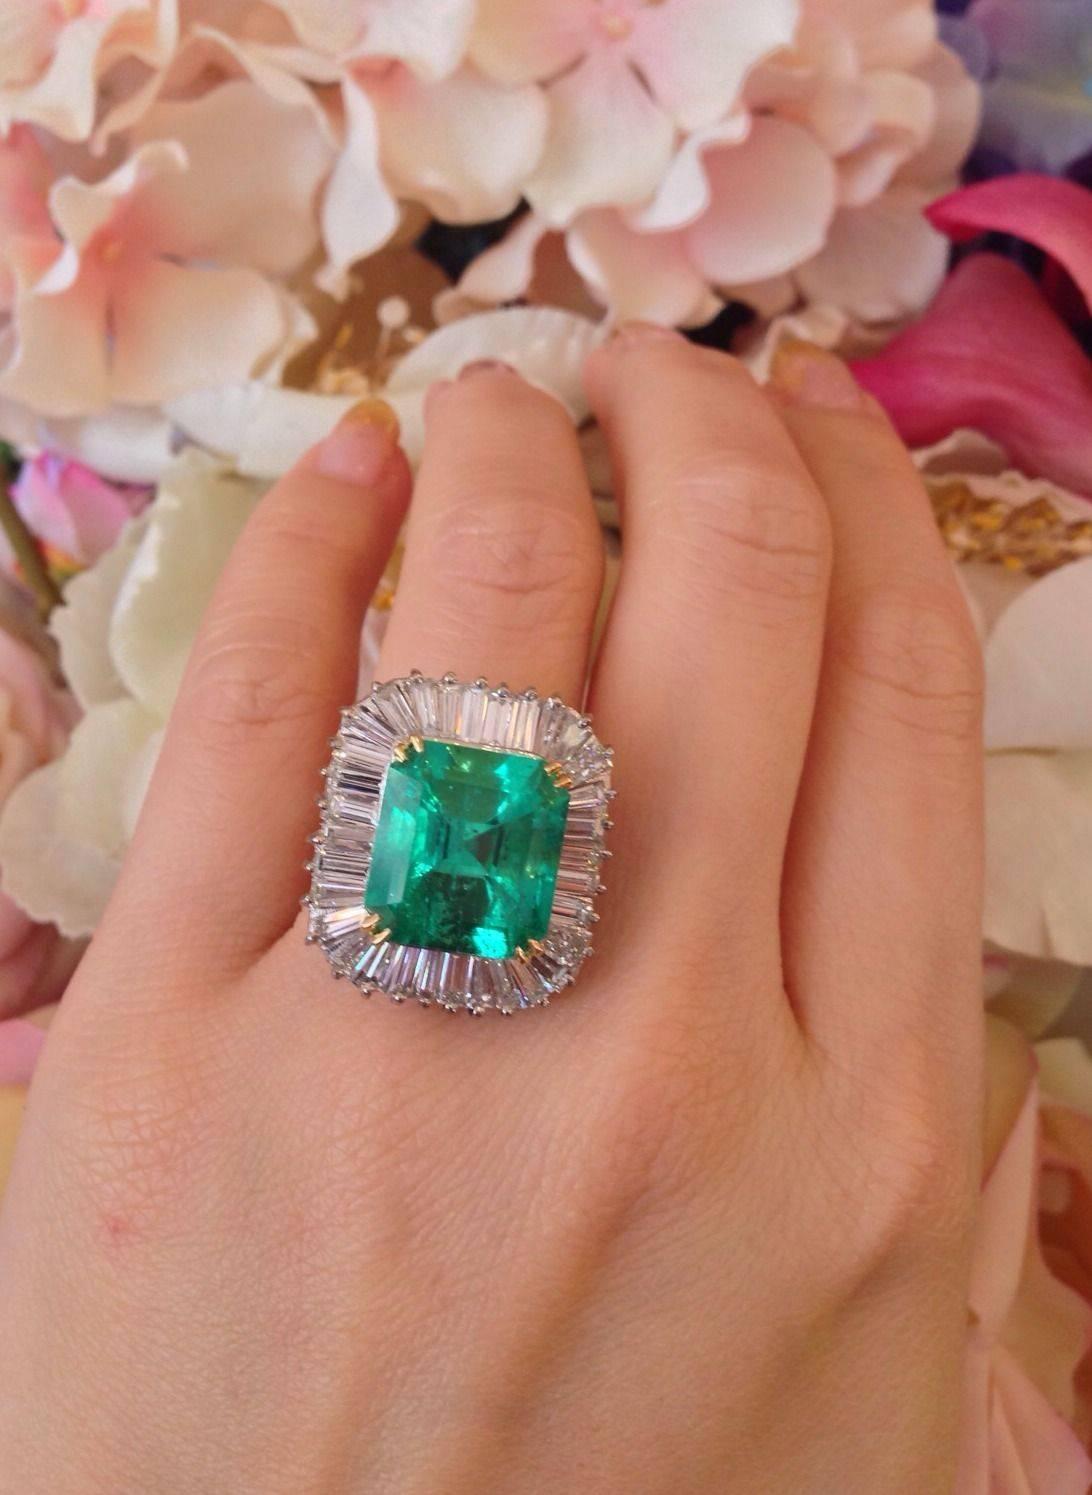 Natural Colombian Emerald ballerina ring featuring a medium to light green, 
Emerald cut Emerald weighing 10.80 ct . GIA Certified (*see photo in the gallery) Stone measurements: 12.75 x 13.95 mm (measured in setting)

Emerald is set in a 